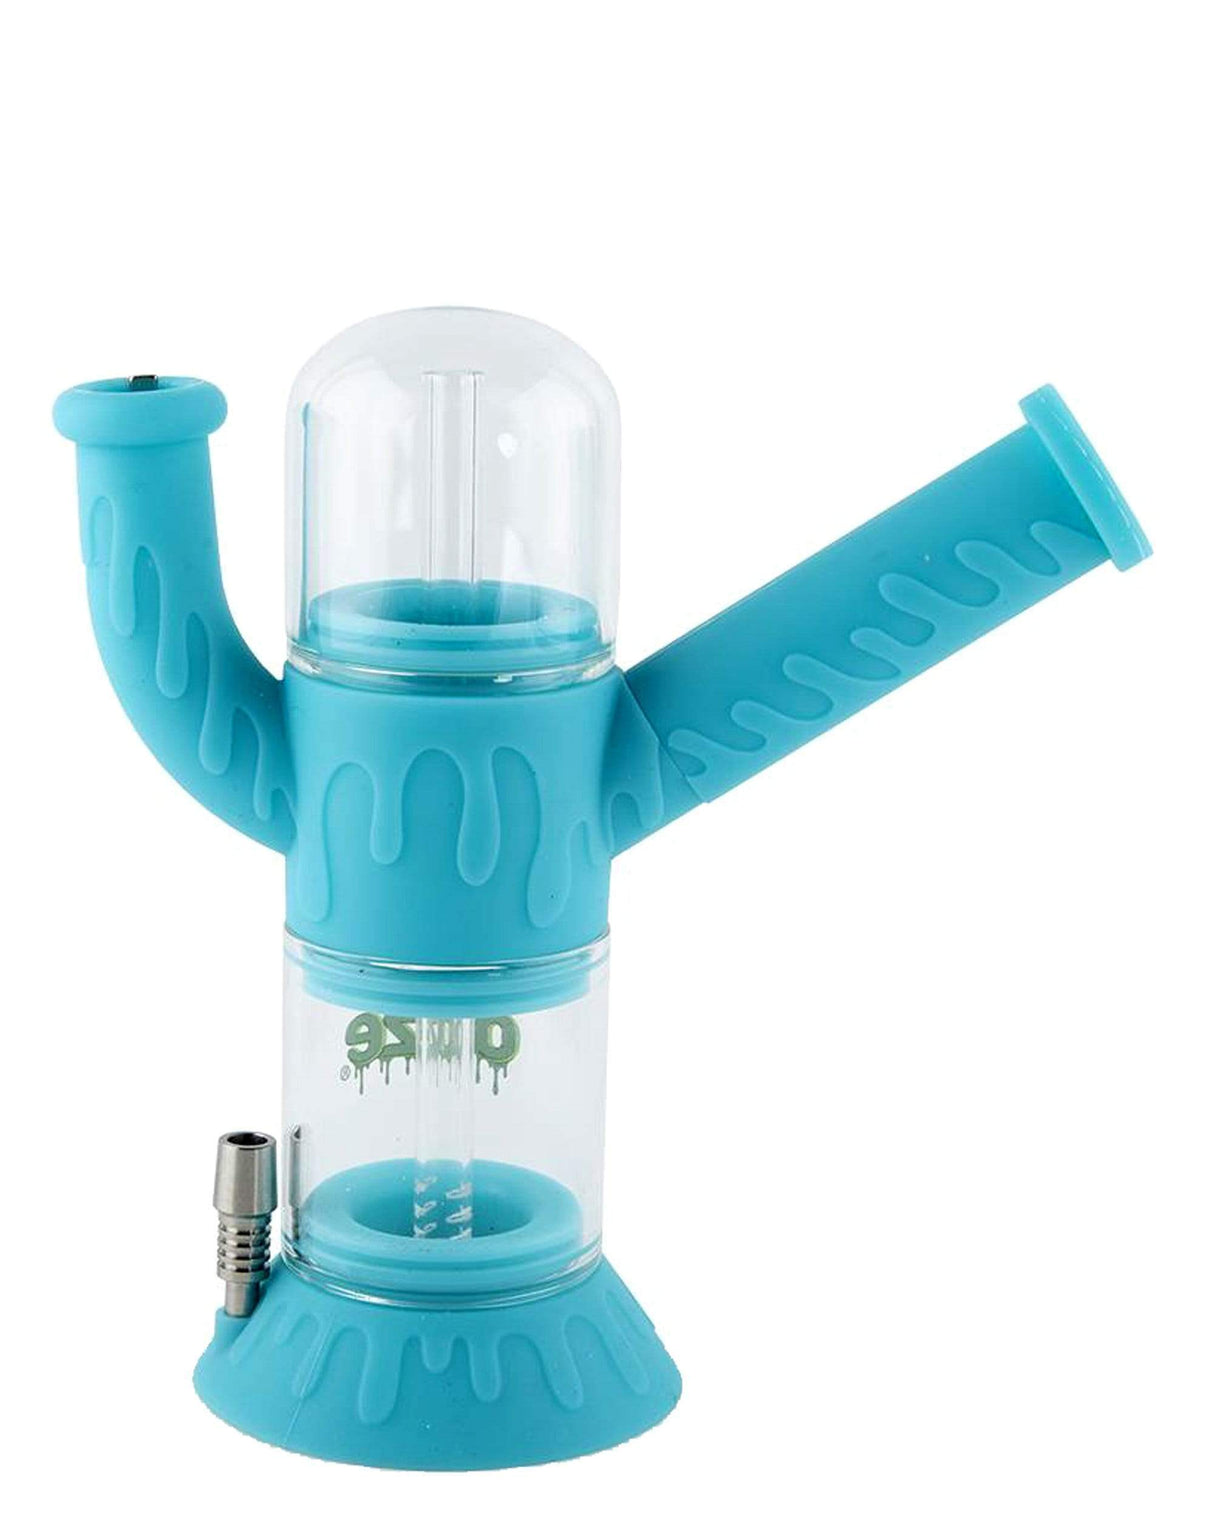 Ooze Cranium Bong & Dab Rig in Teal with Quartz Banger - Front View